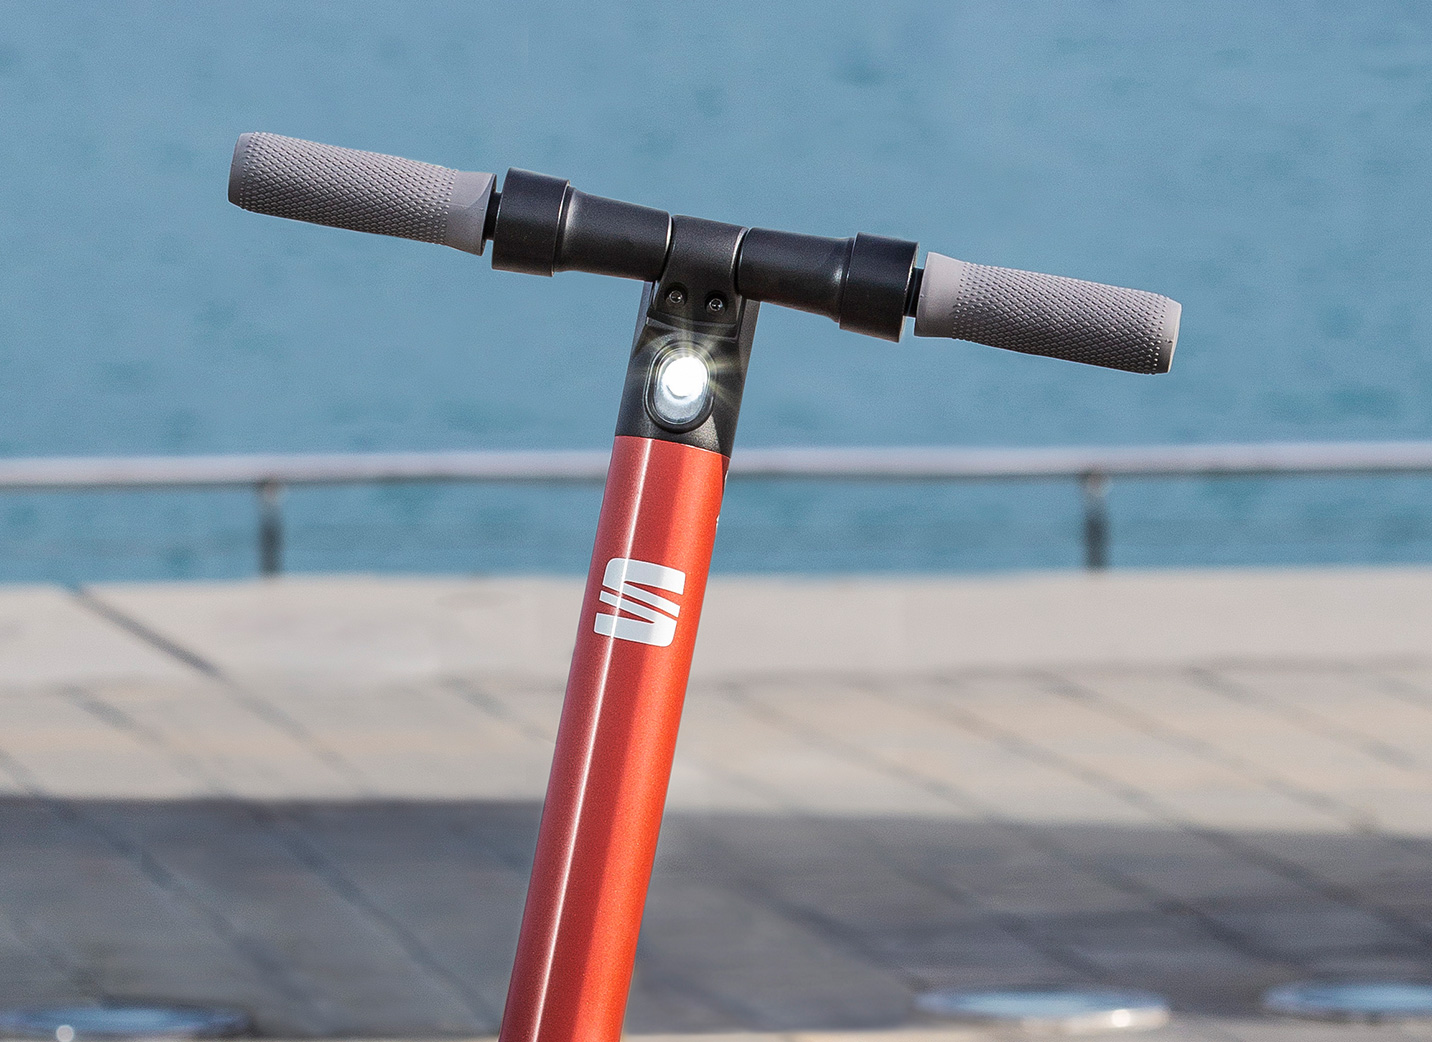 SEAT eXS KickScooter urban mobility solution powered by Segway - LED light